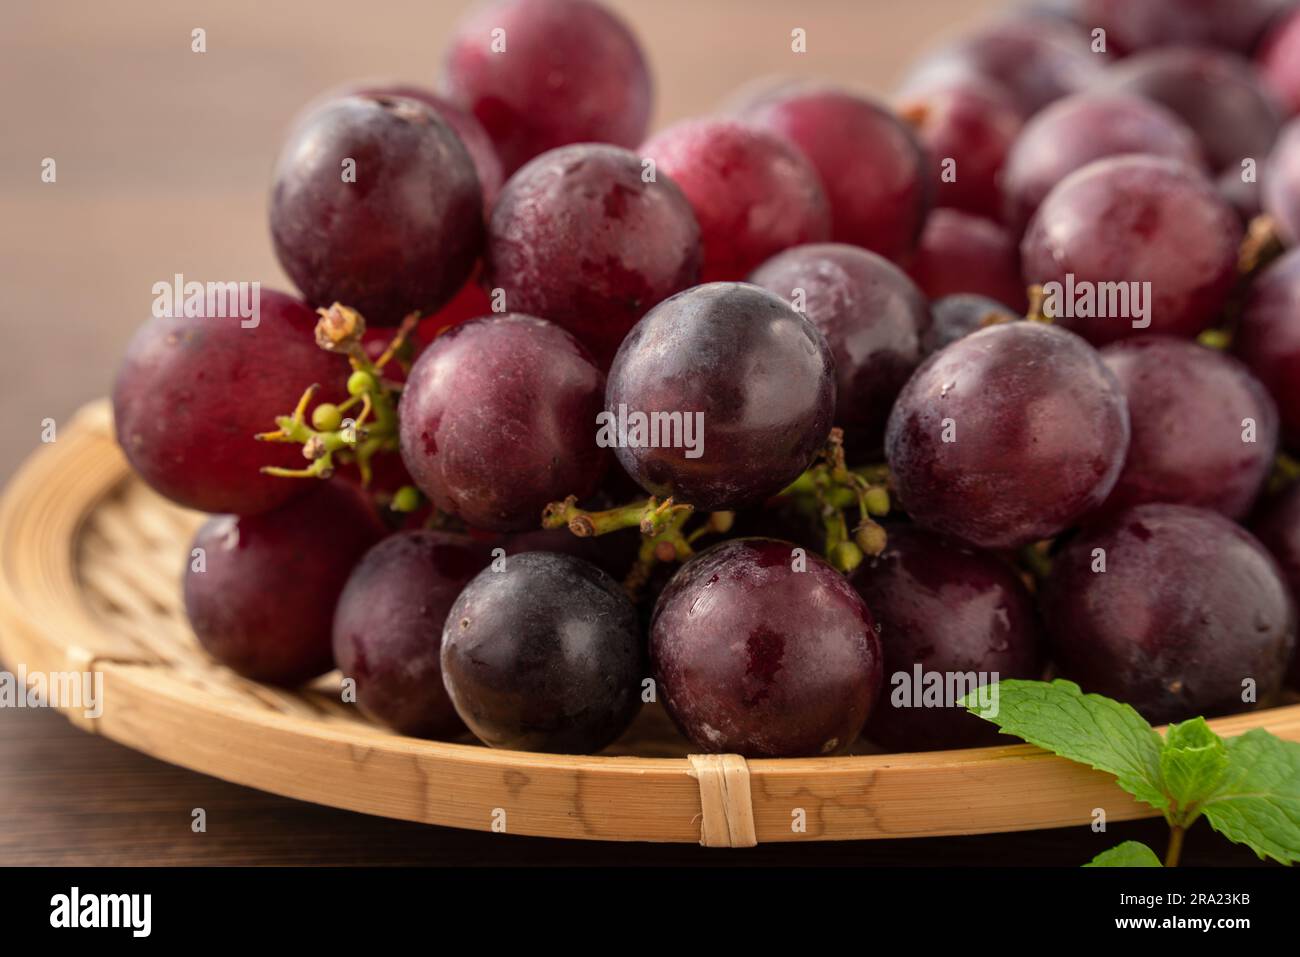 Delicious bunch of purple grapes fruit on a tray over wooden table background. Stock Photo